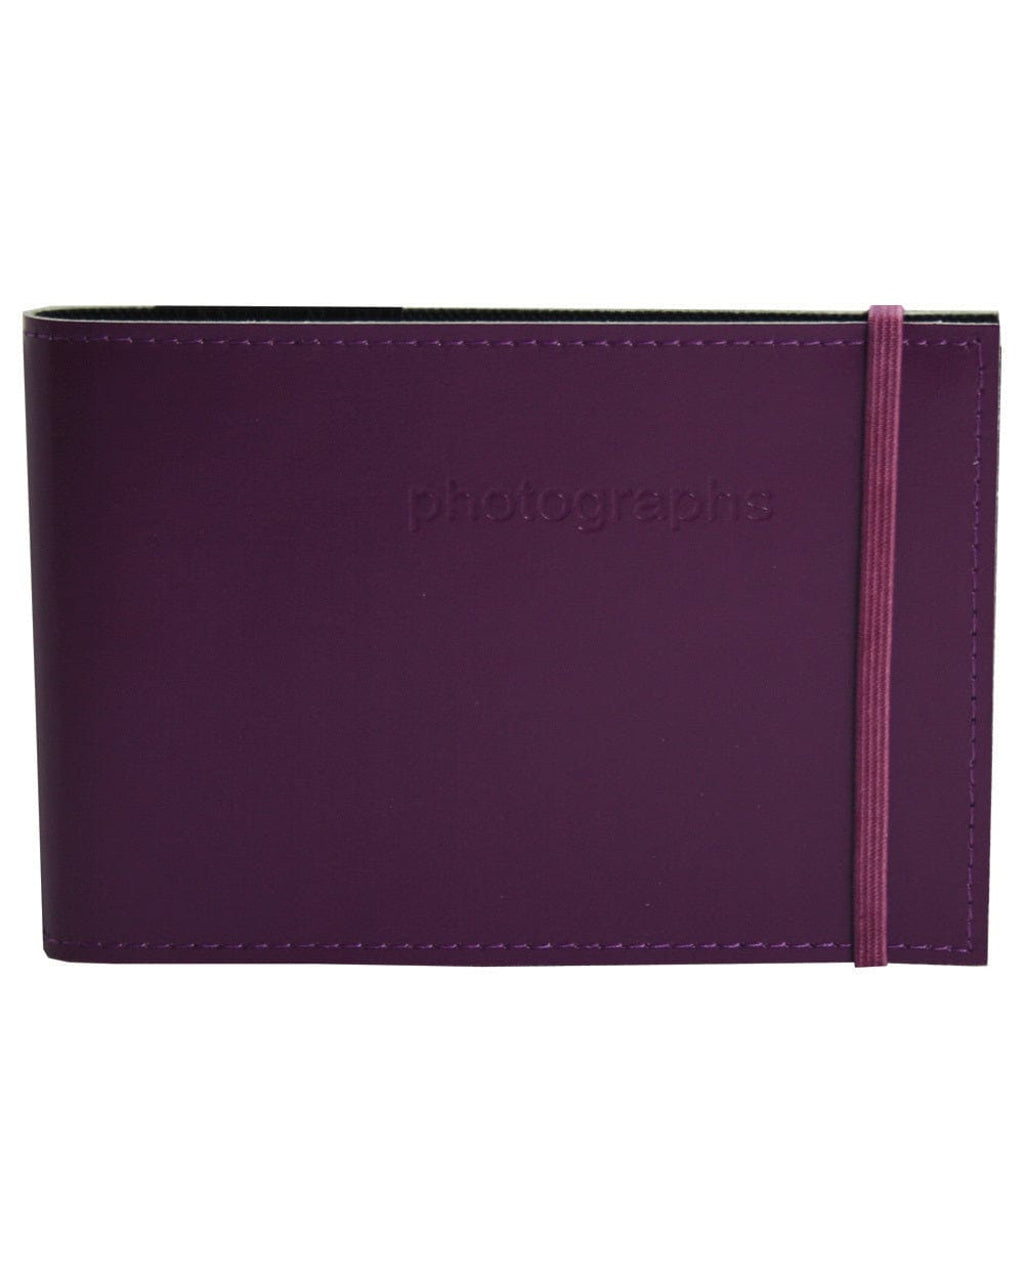 Citi Leather Aubergine Slip-in Bragbook Photo Album from our Photo Albums collection by Profile Products Australia